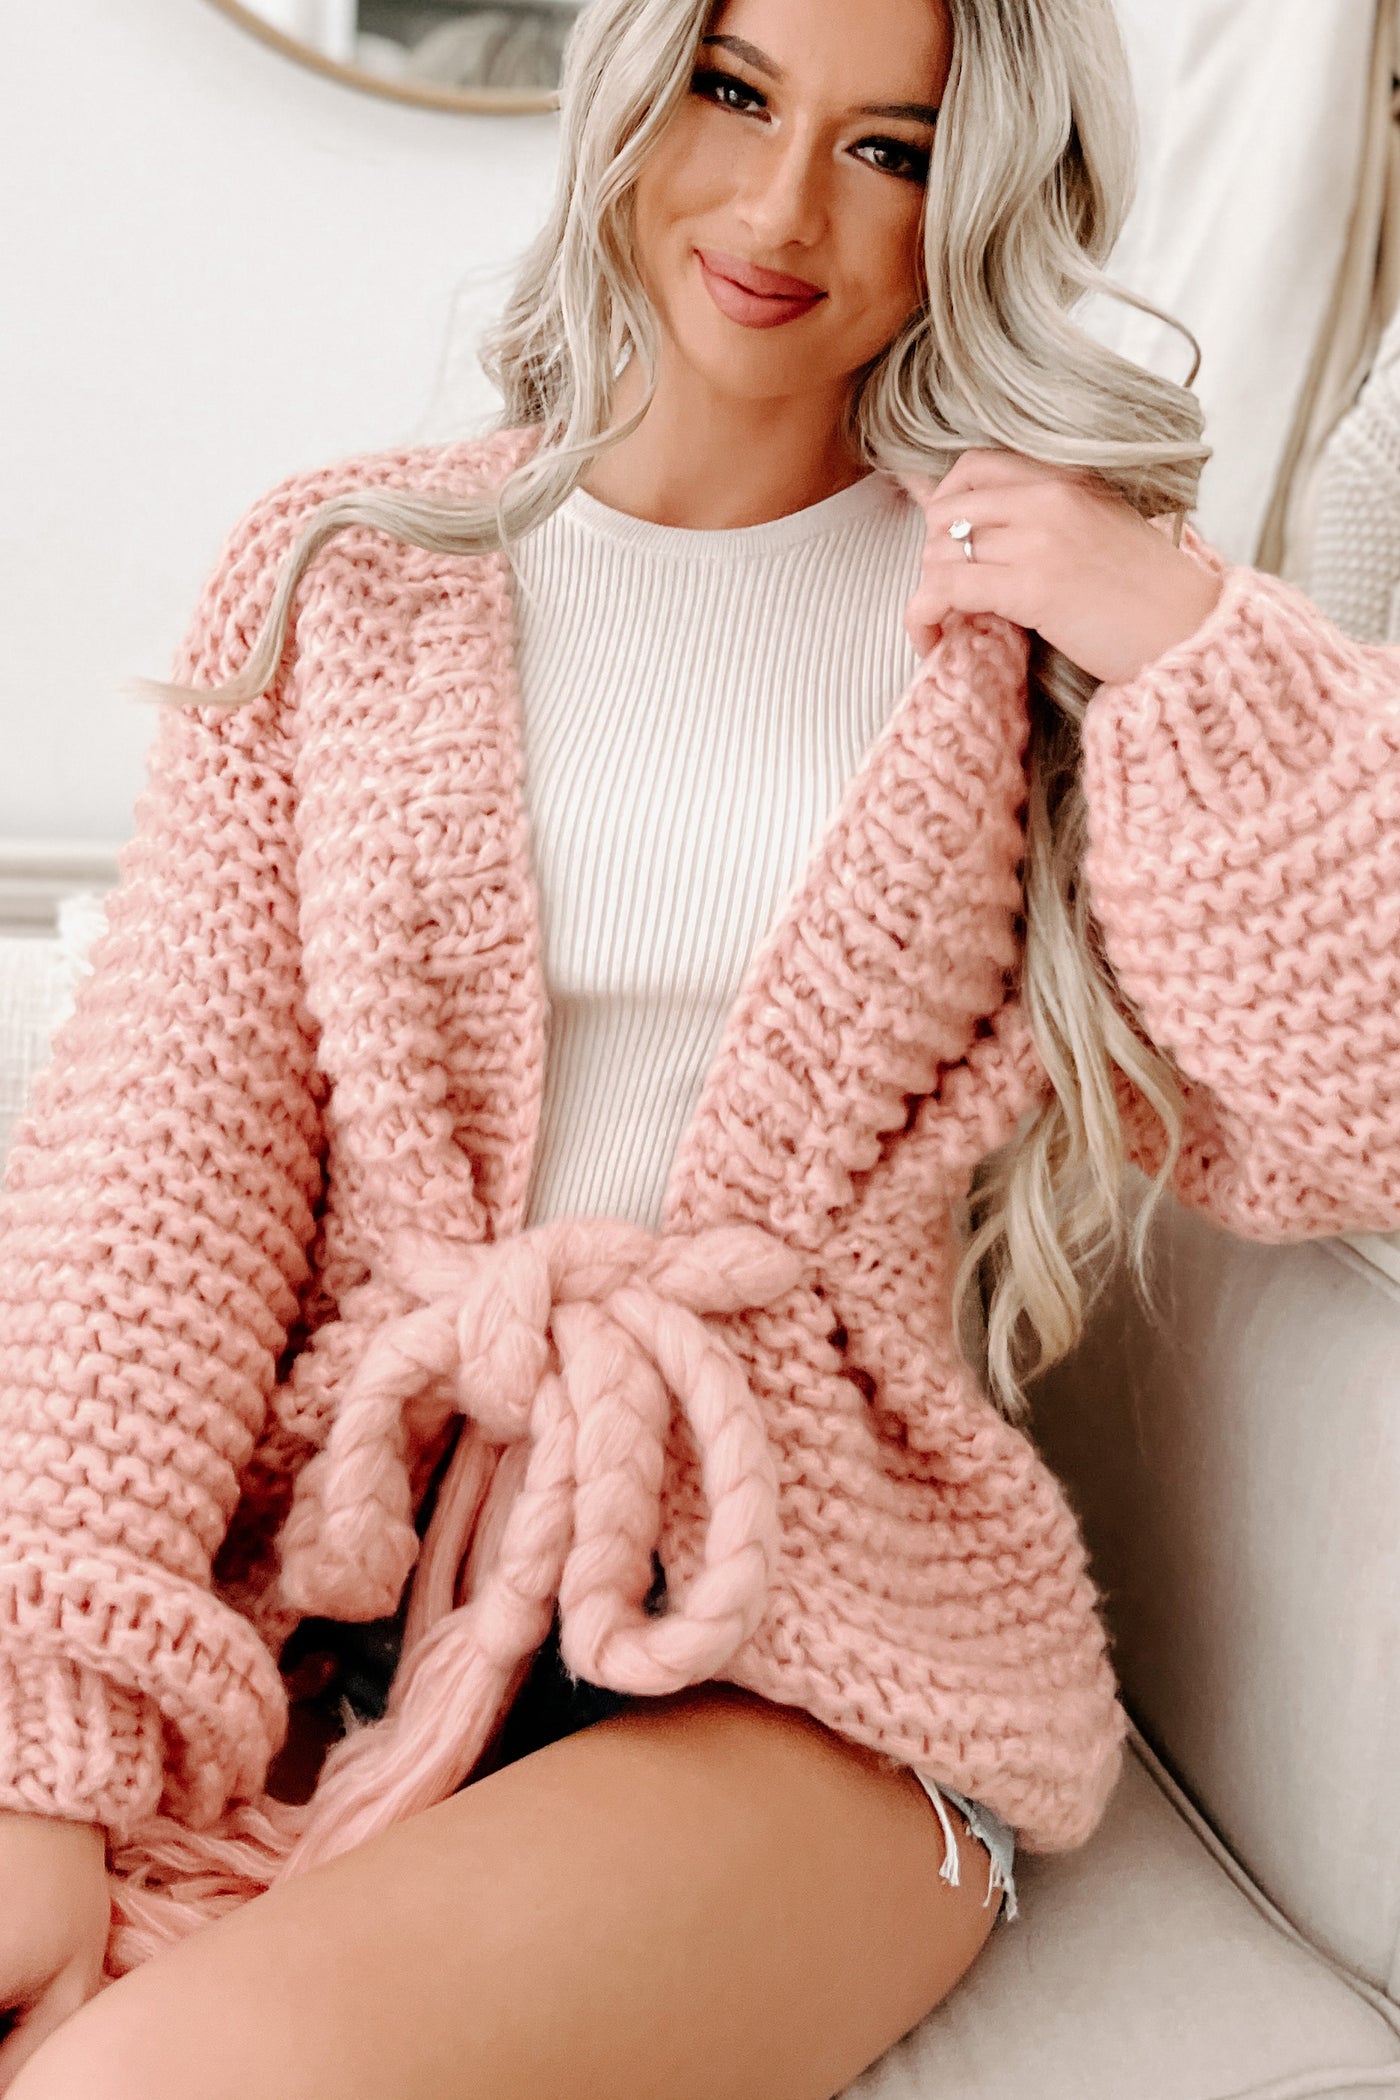 Doorbuster- Cocoa & Cozies Braided Tie Chunky Knit Cardigan (Pink) - NanaMacs